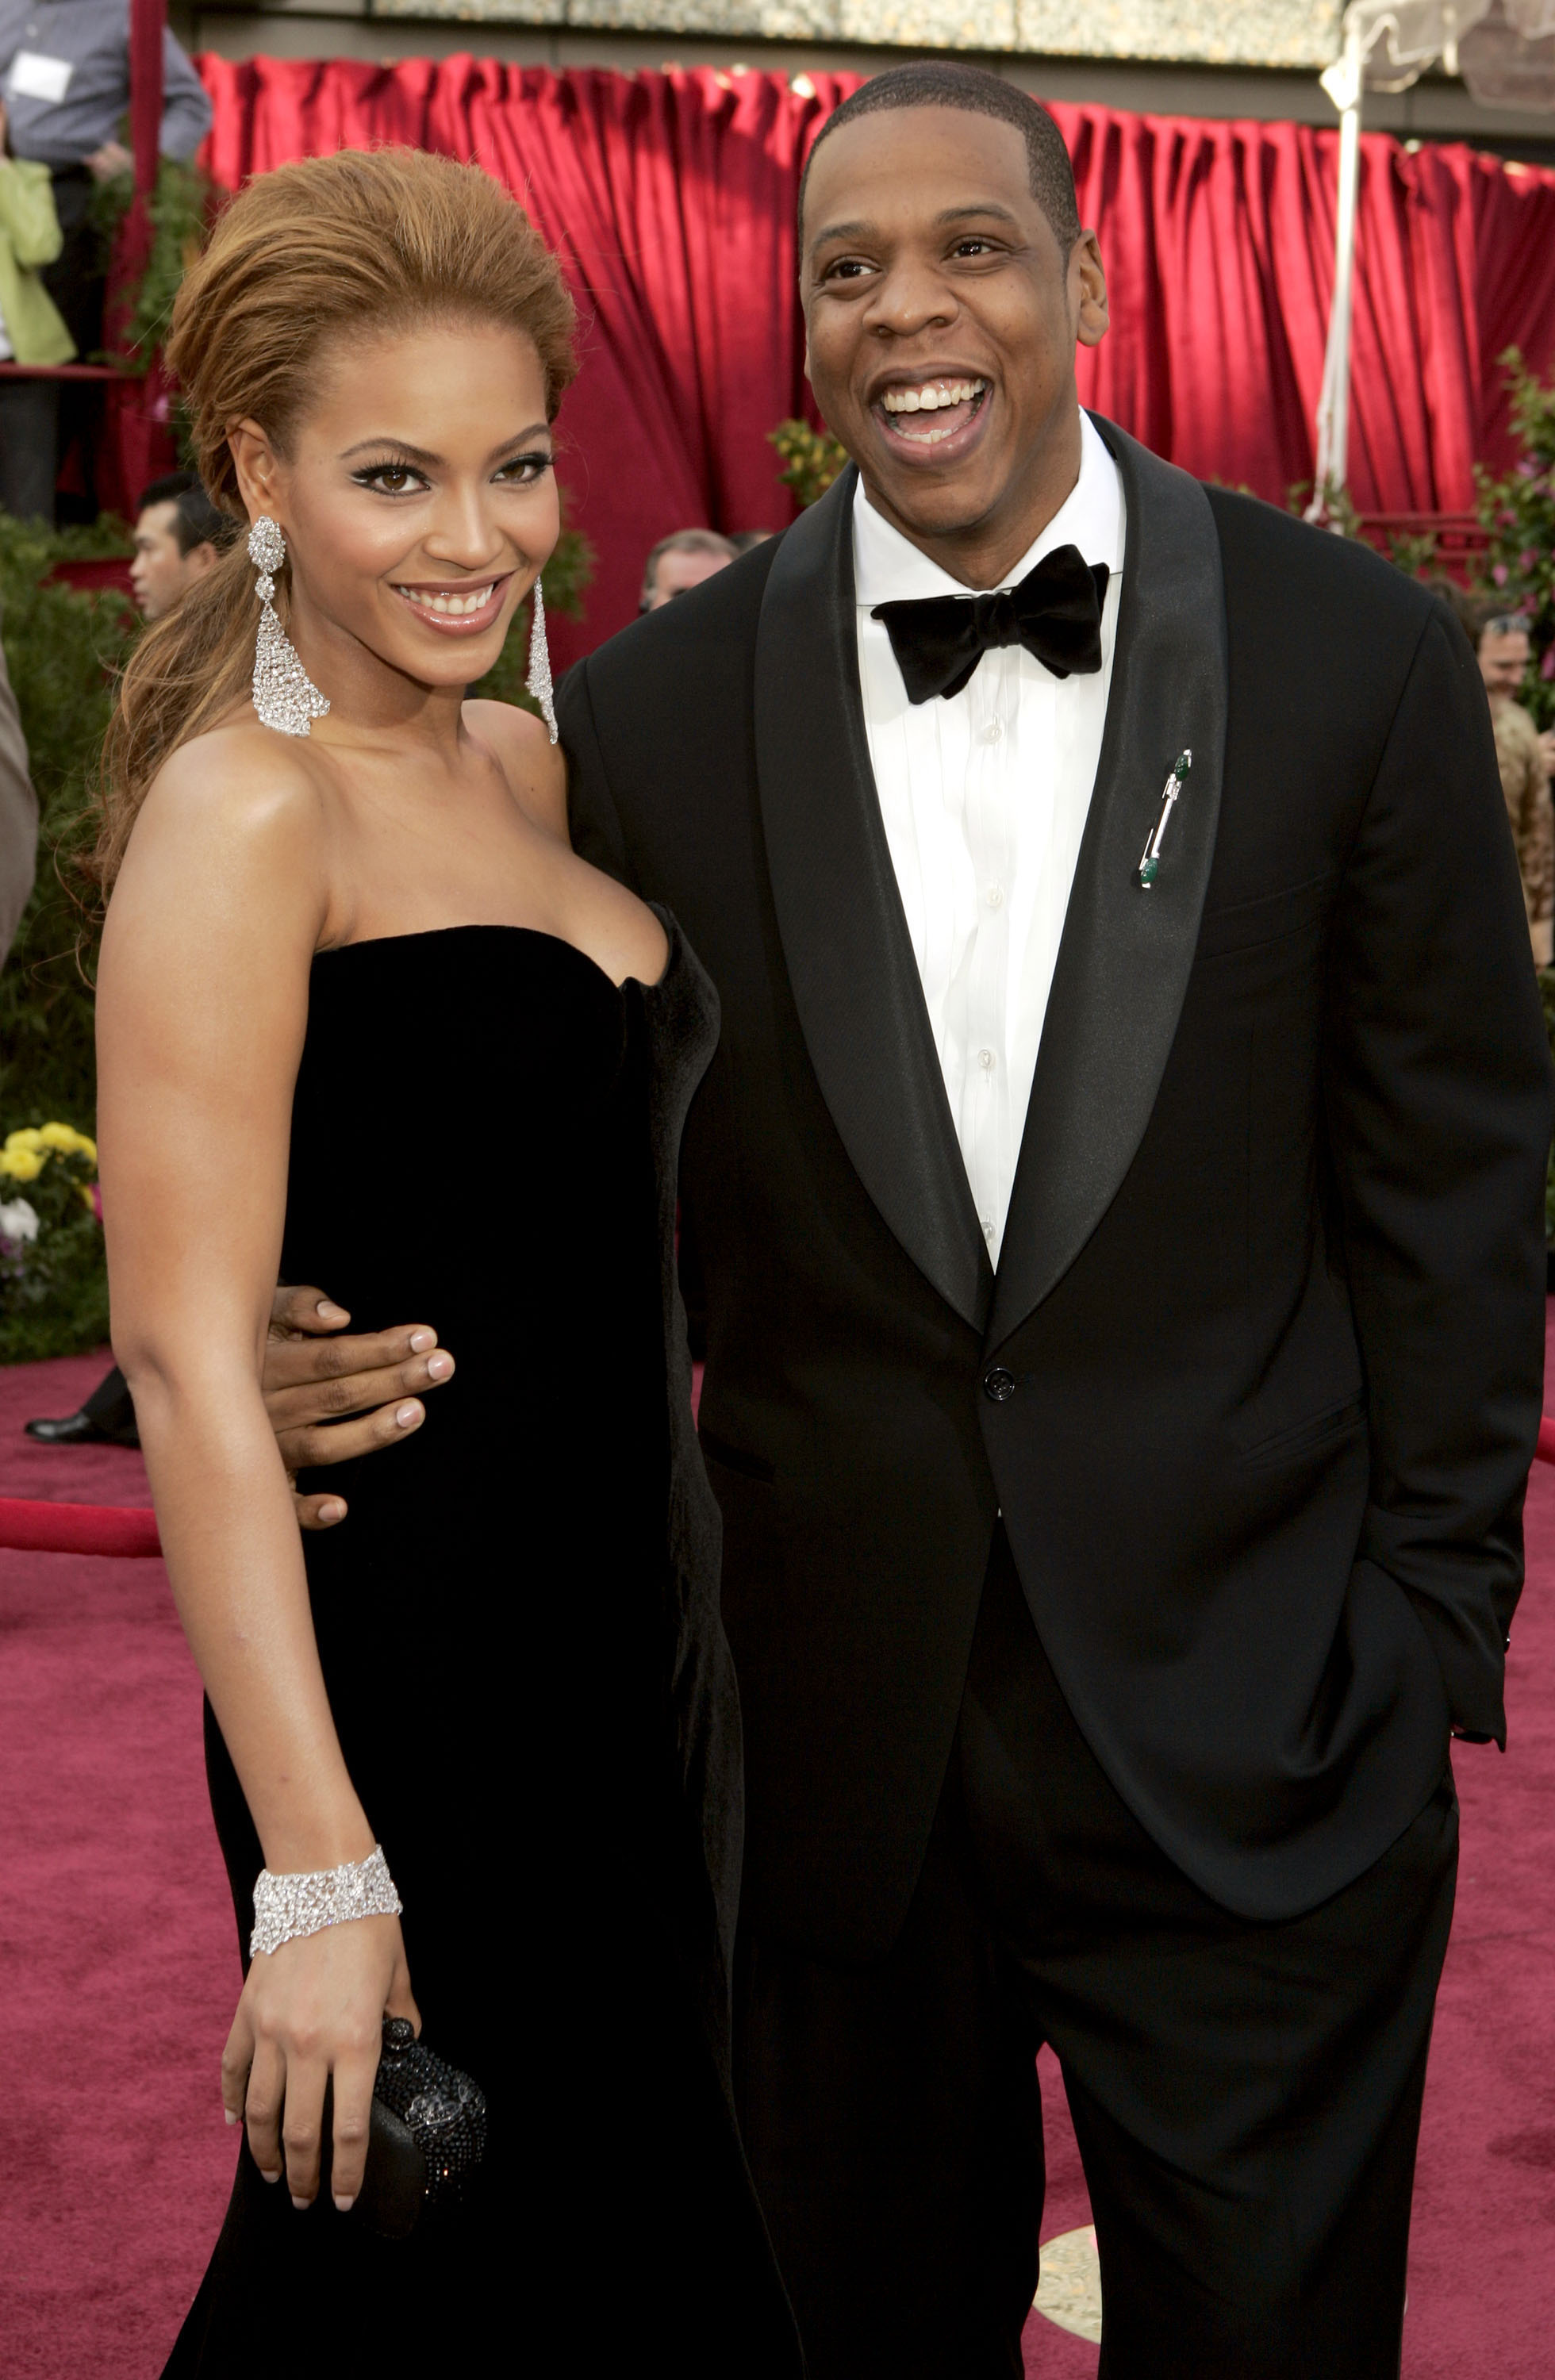 Beyonce and Jay-Z attend the 77th Annual Academy Awards at the Kodak Theatre on February 27, 2005 in Hollywood, California | Source: Getty Images